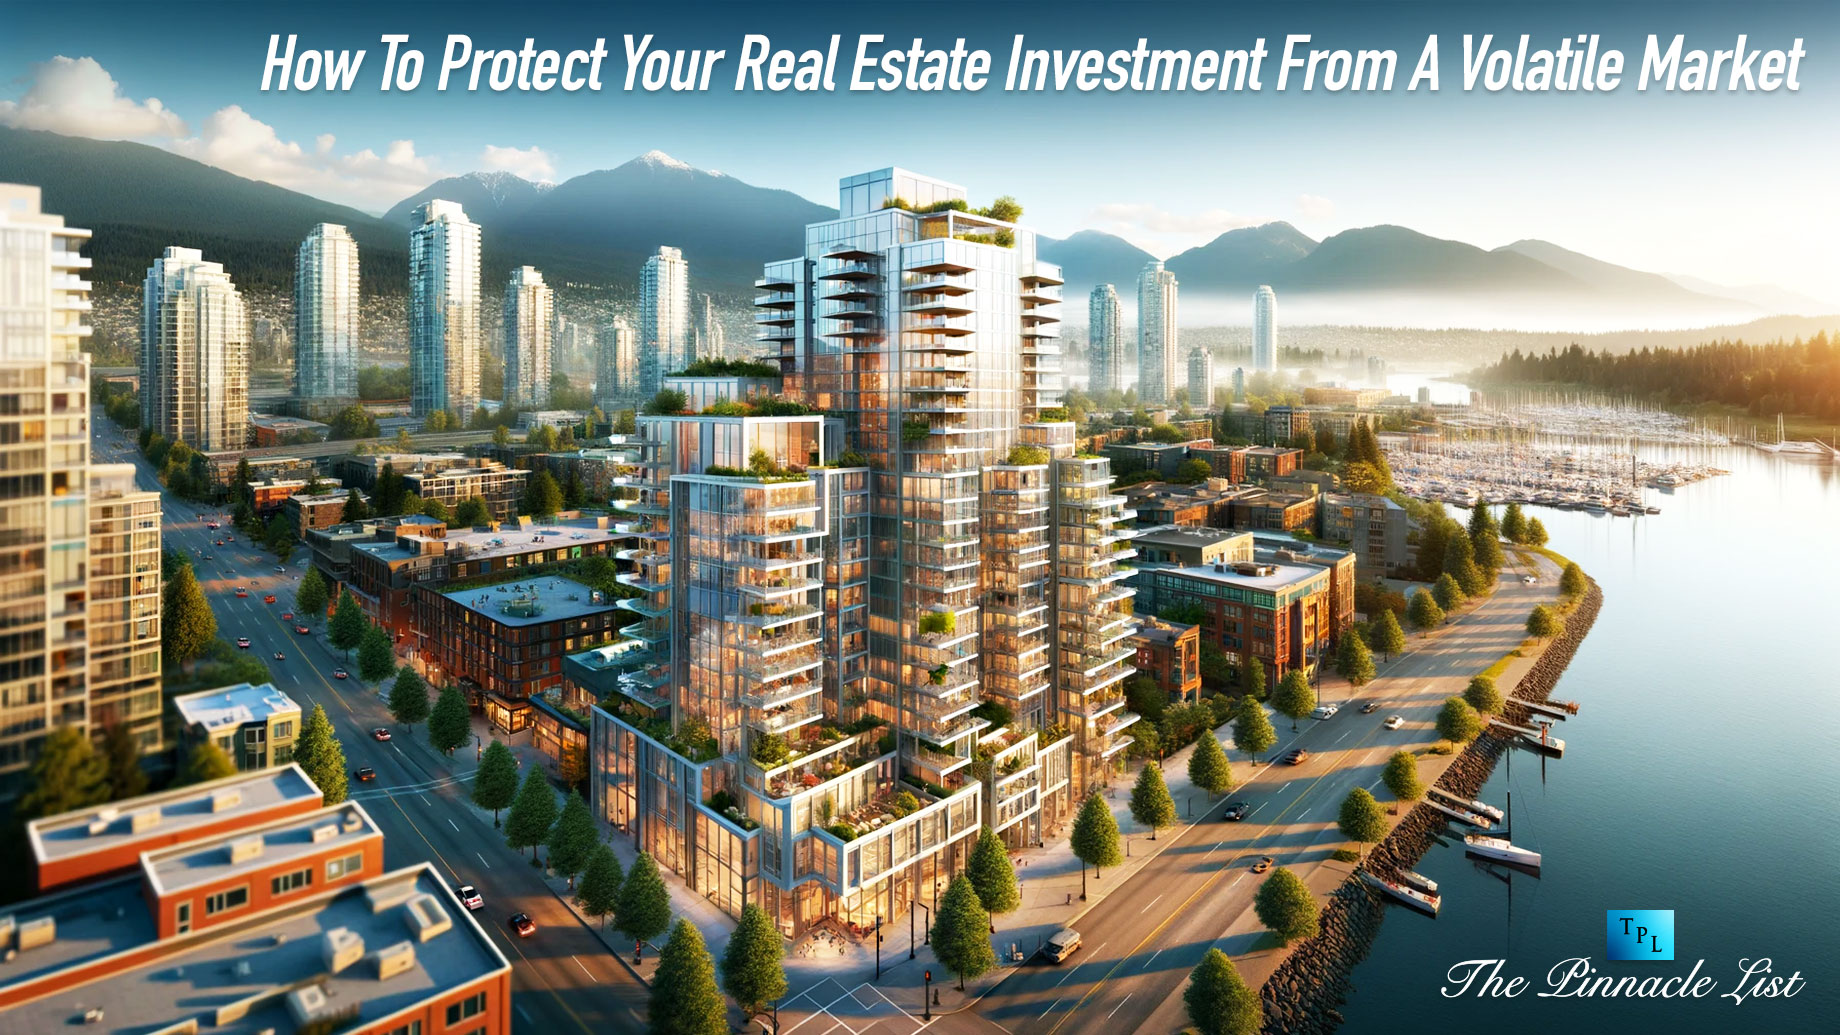 How To Protect Your Real Estate Investment From A Volatile Market